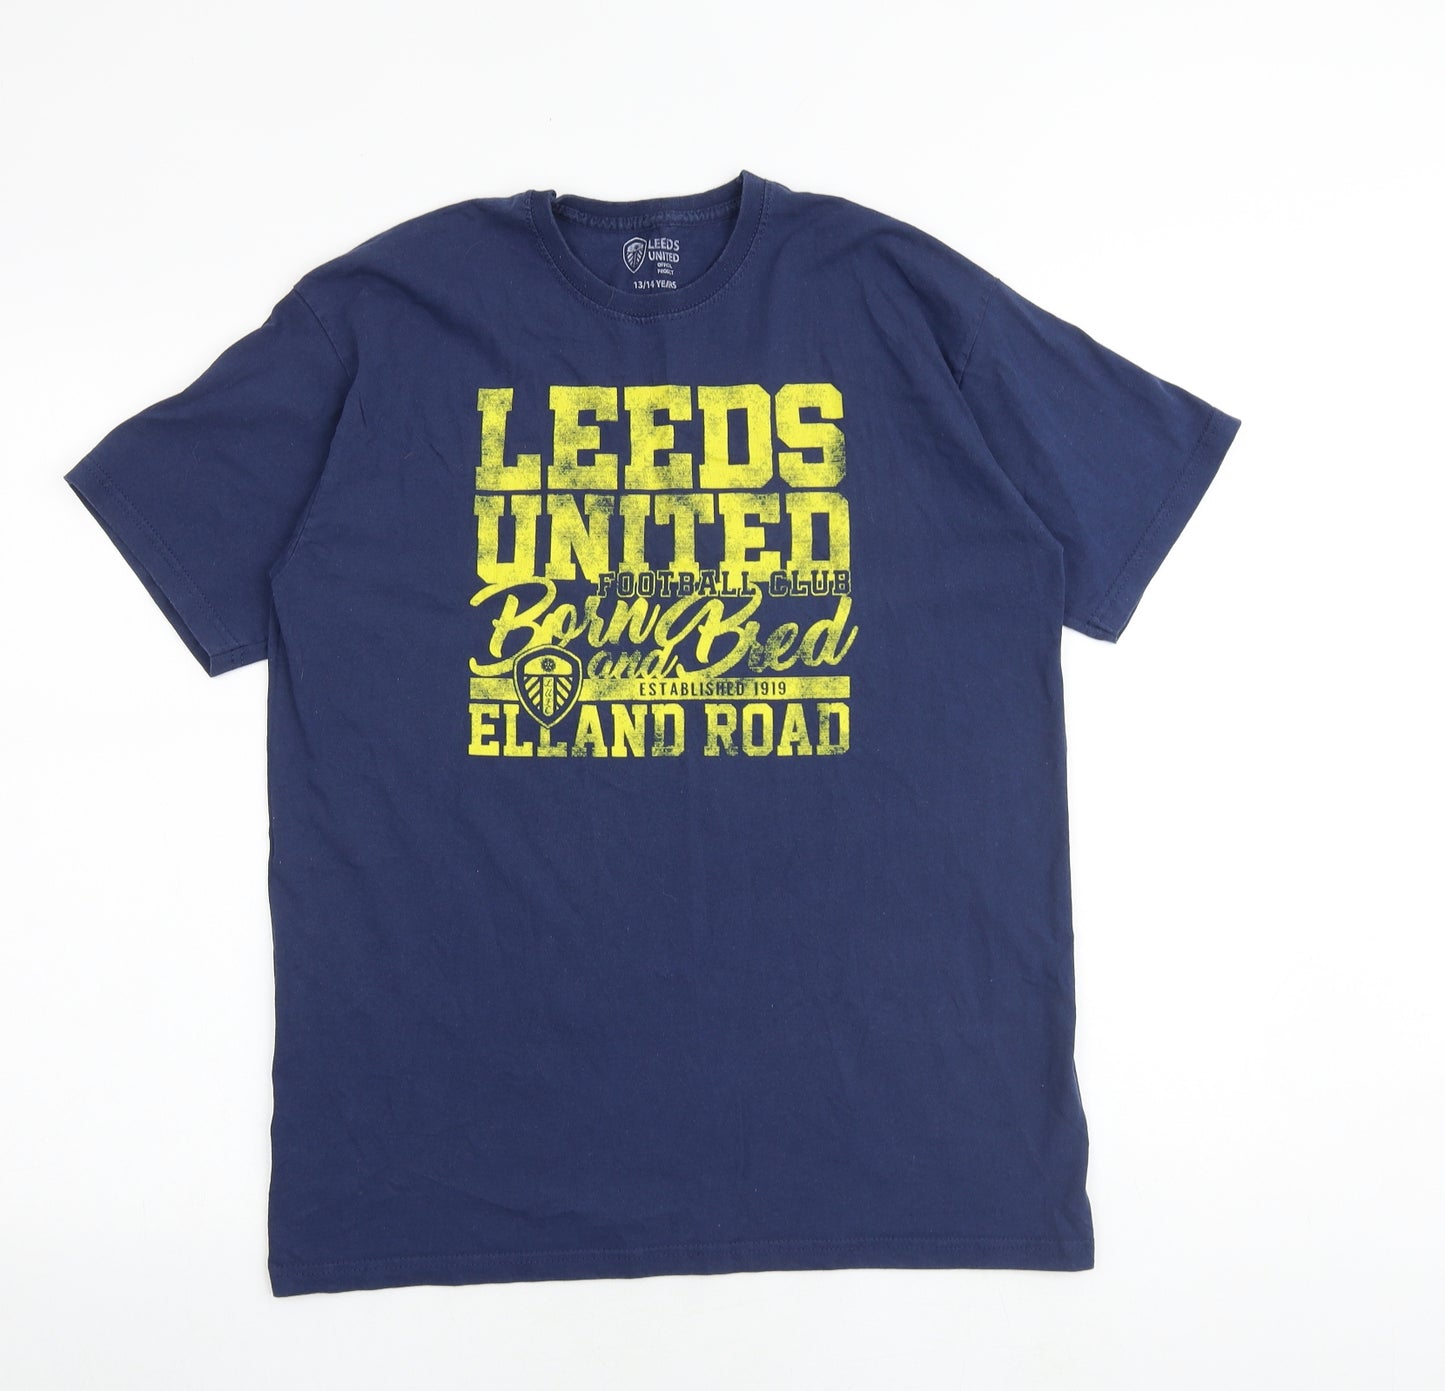 Leeds United Boys Blue 100% Cotton Basic T-Shirt Size 14-15 Years Crew Neck Pullover